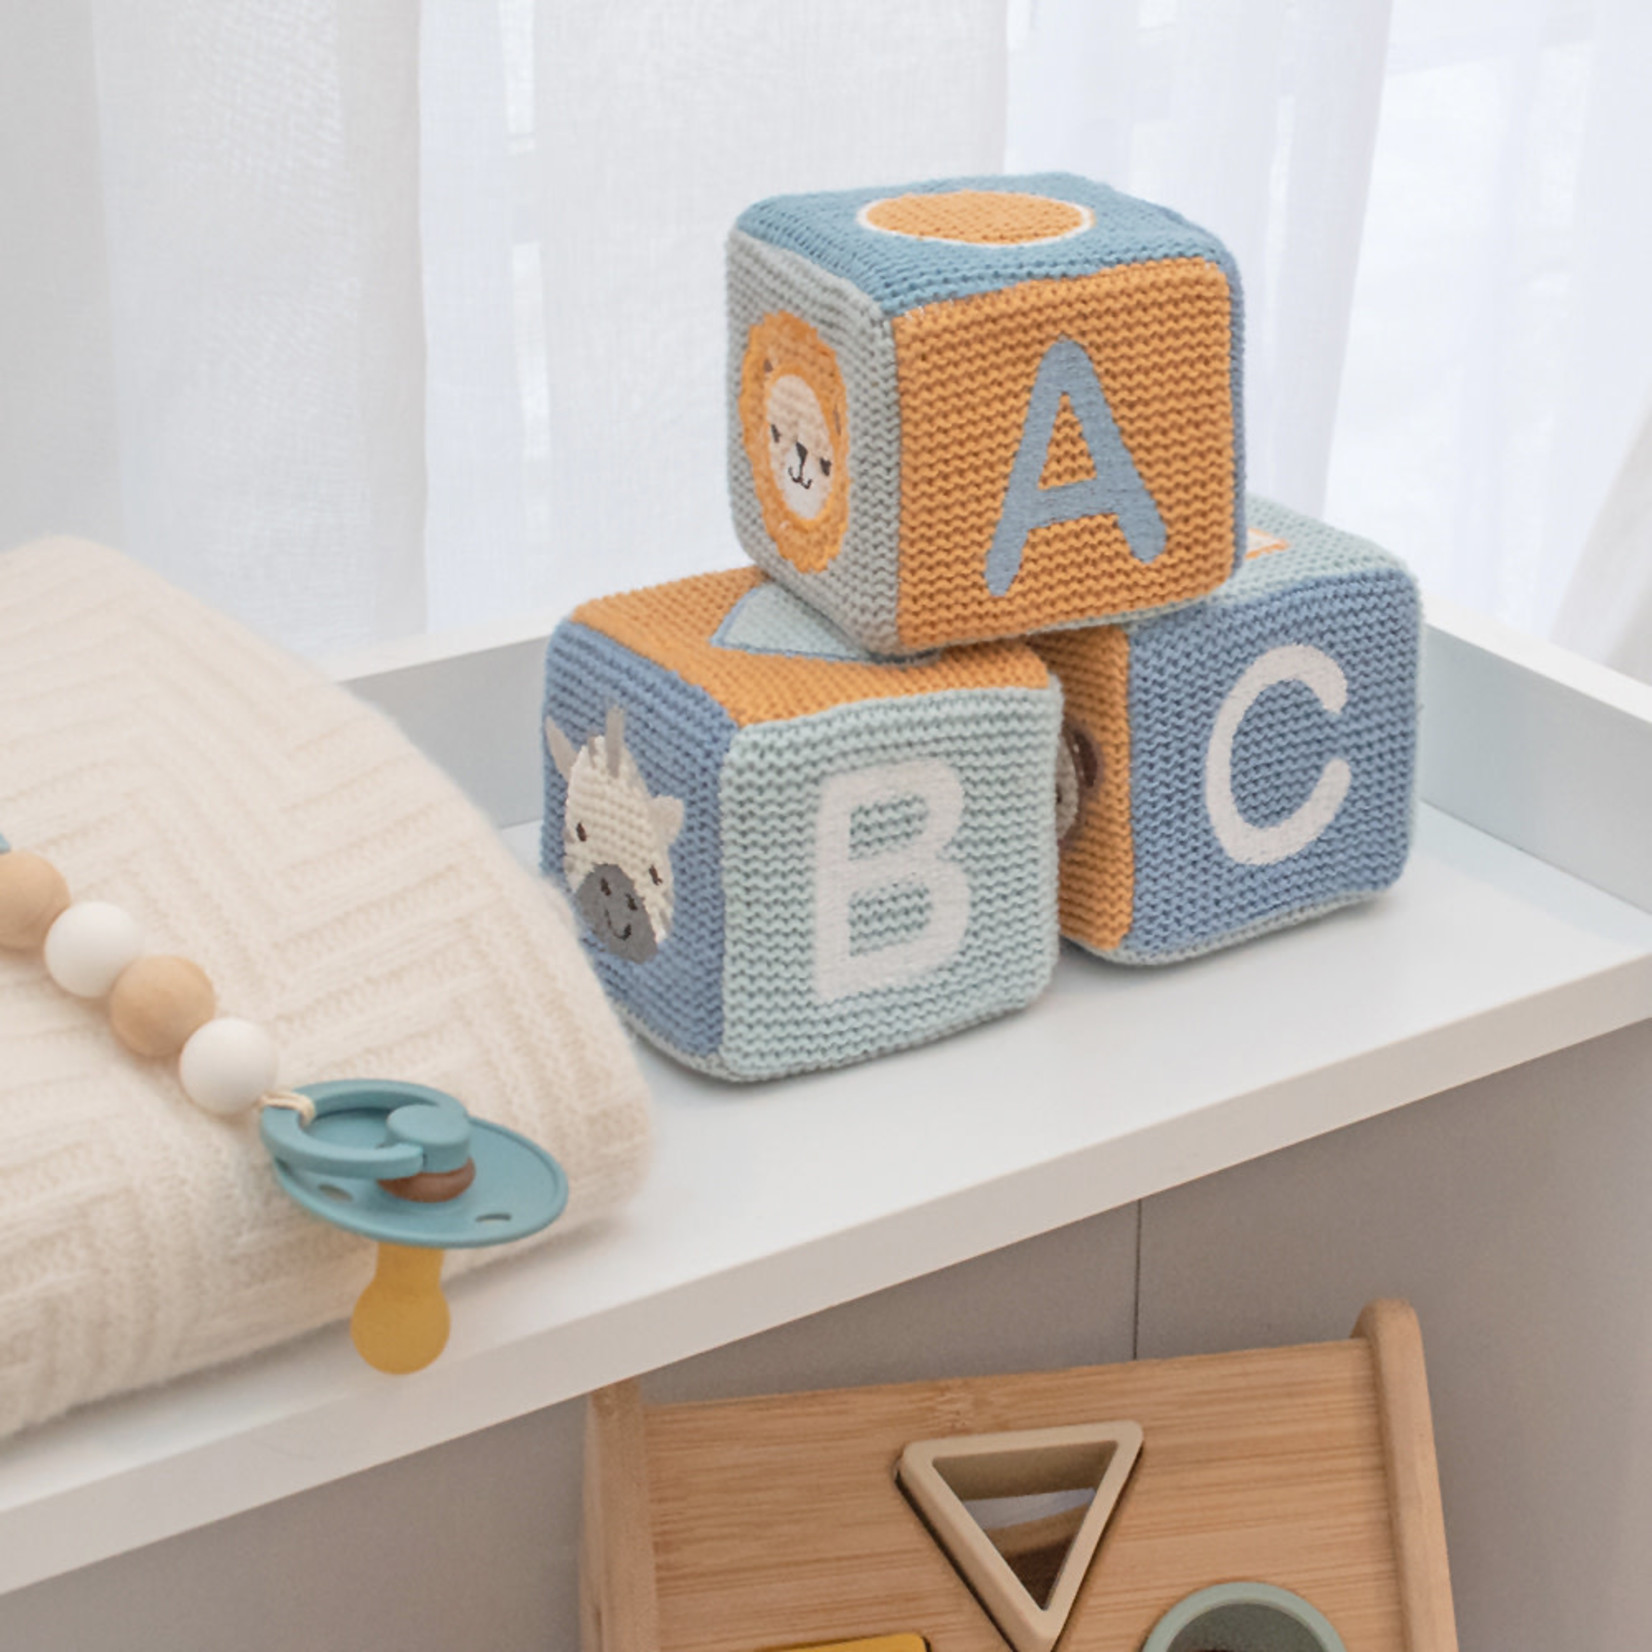 Living Textiles Knitted Stacking Blocks-Leo the Lion